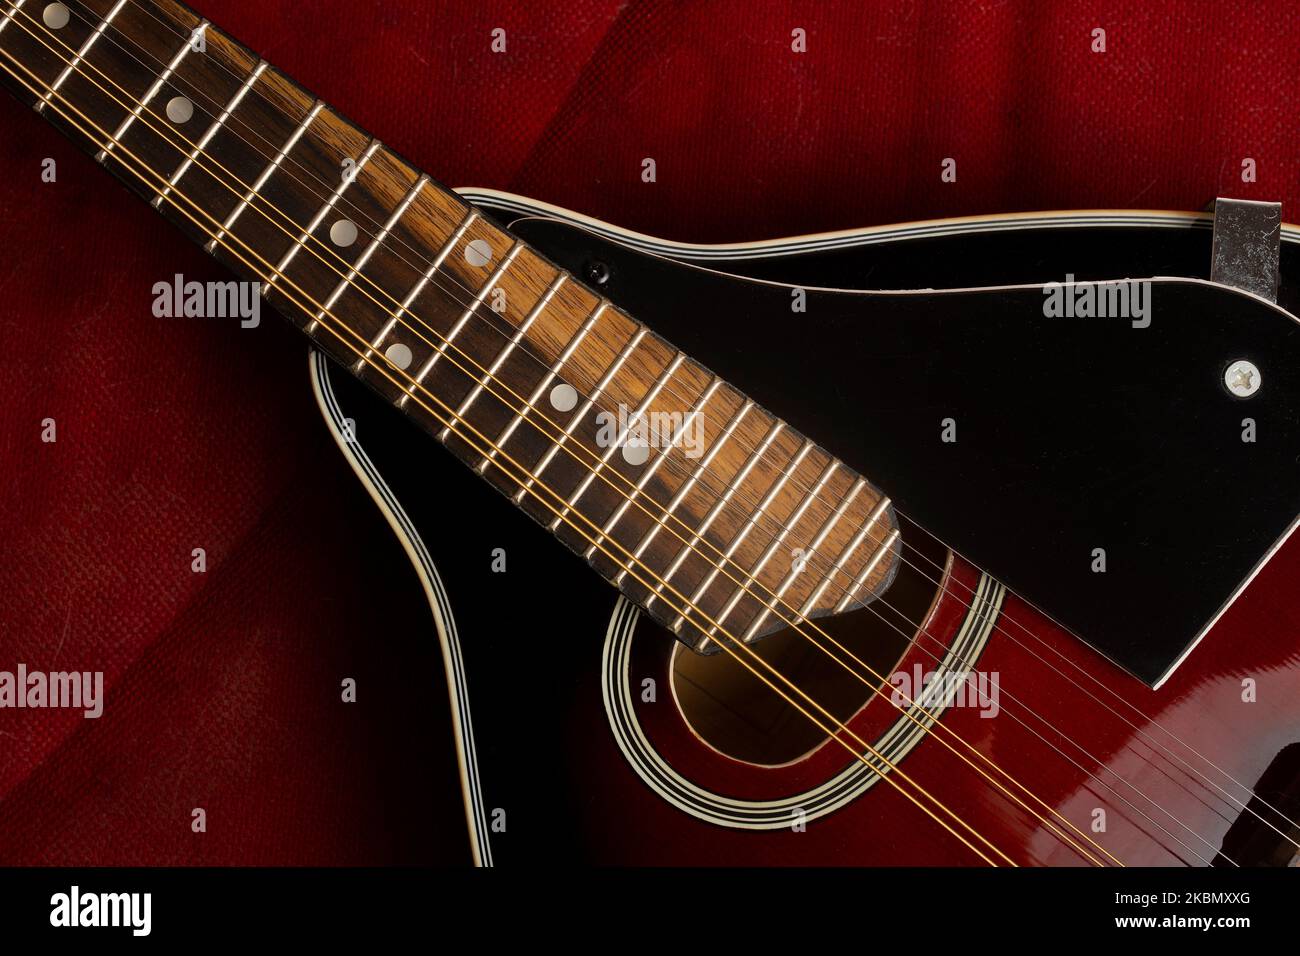 Detail of the soundbox and neck of a mandolin Stock Photo